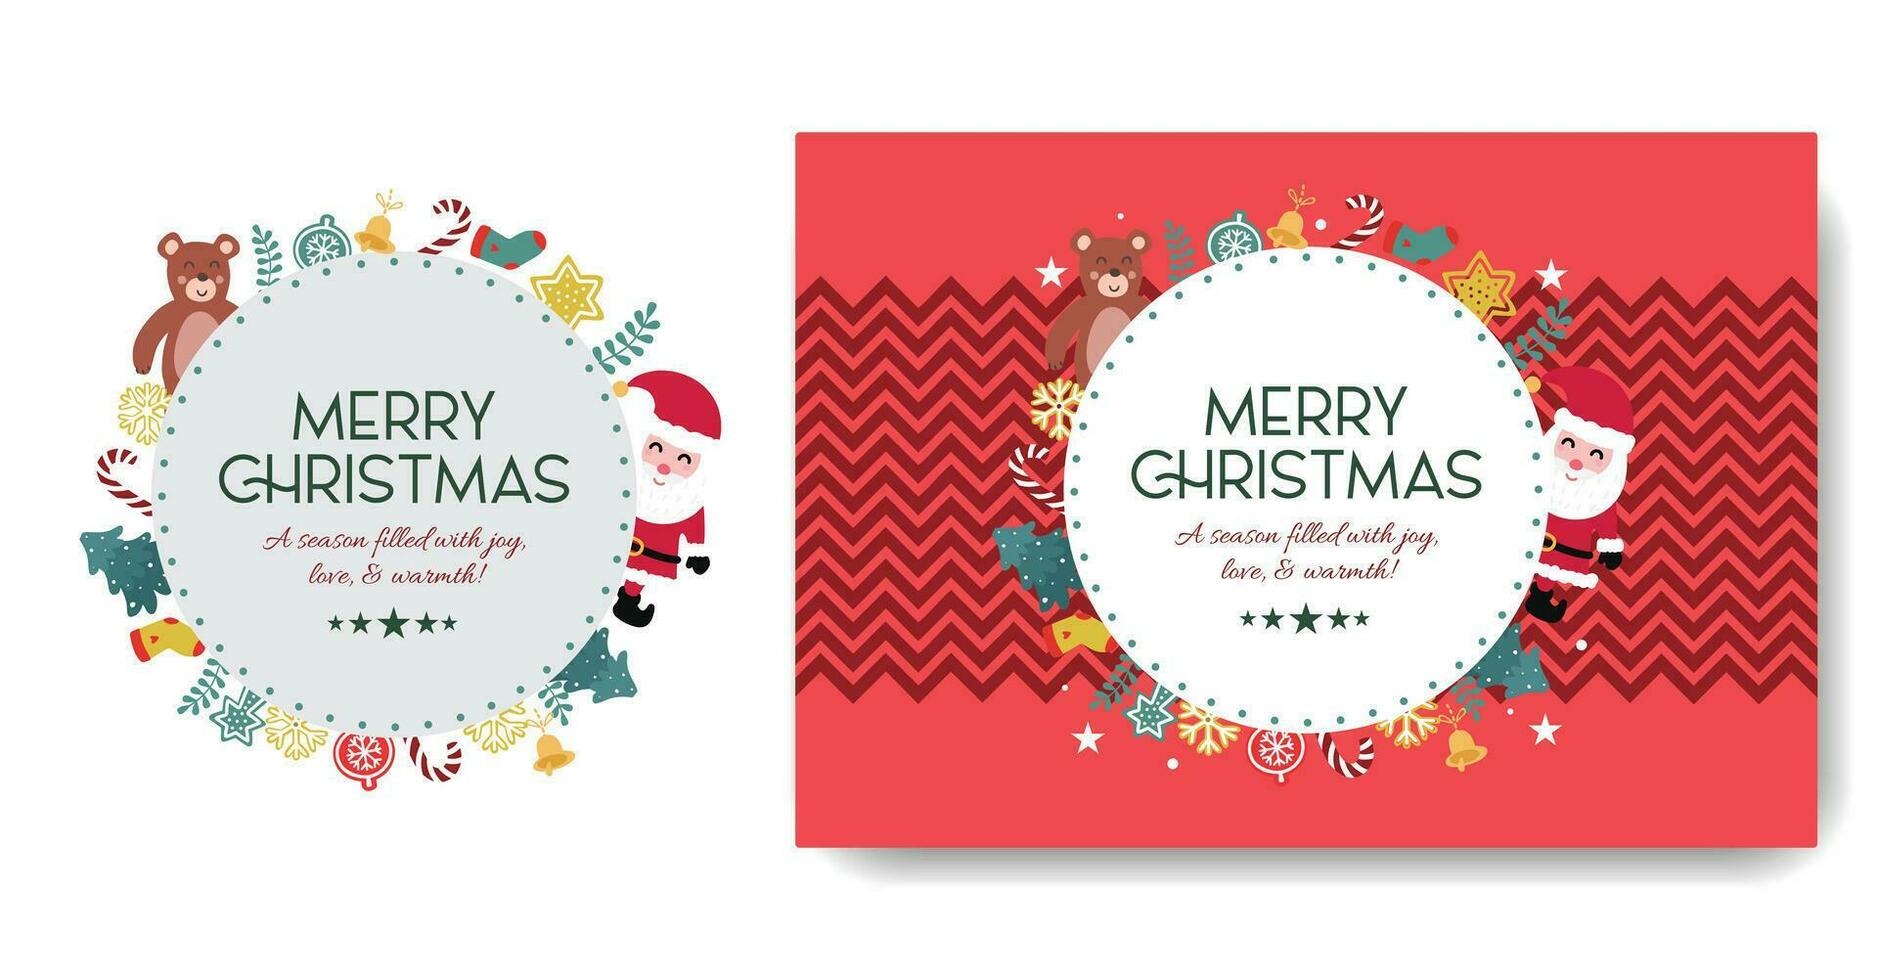 Merry Christmas gift packaging box packaging design with Christmas elements vector file download